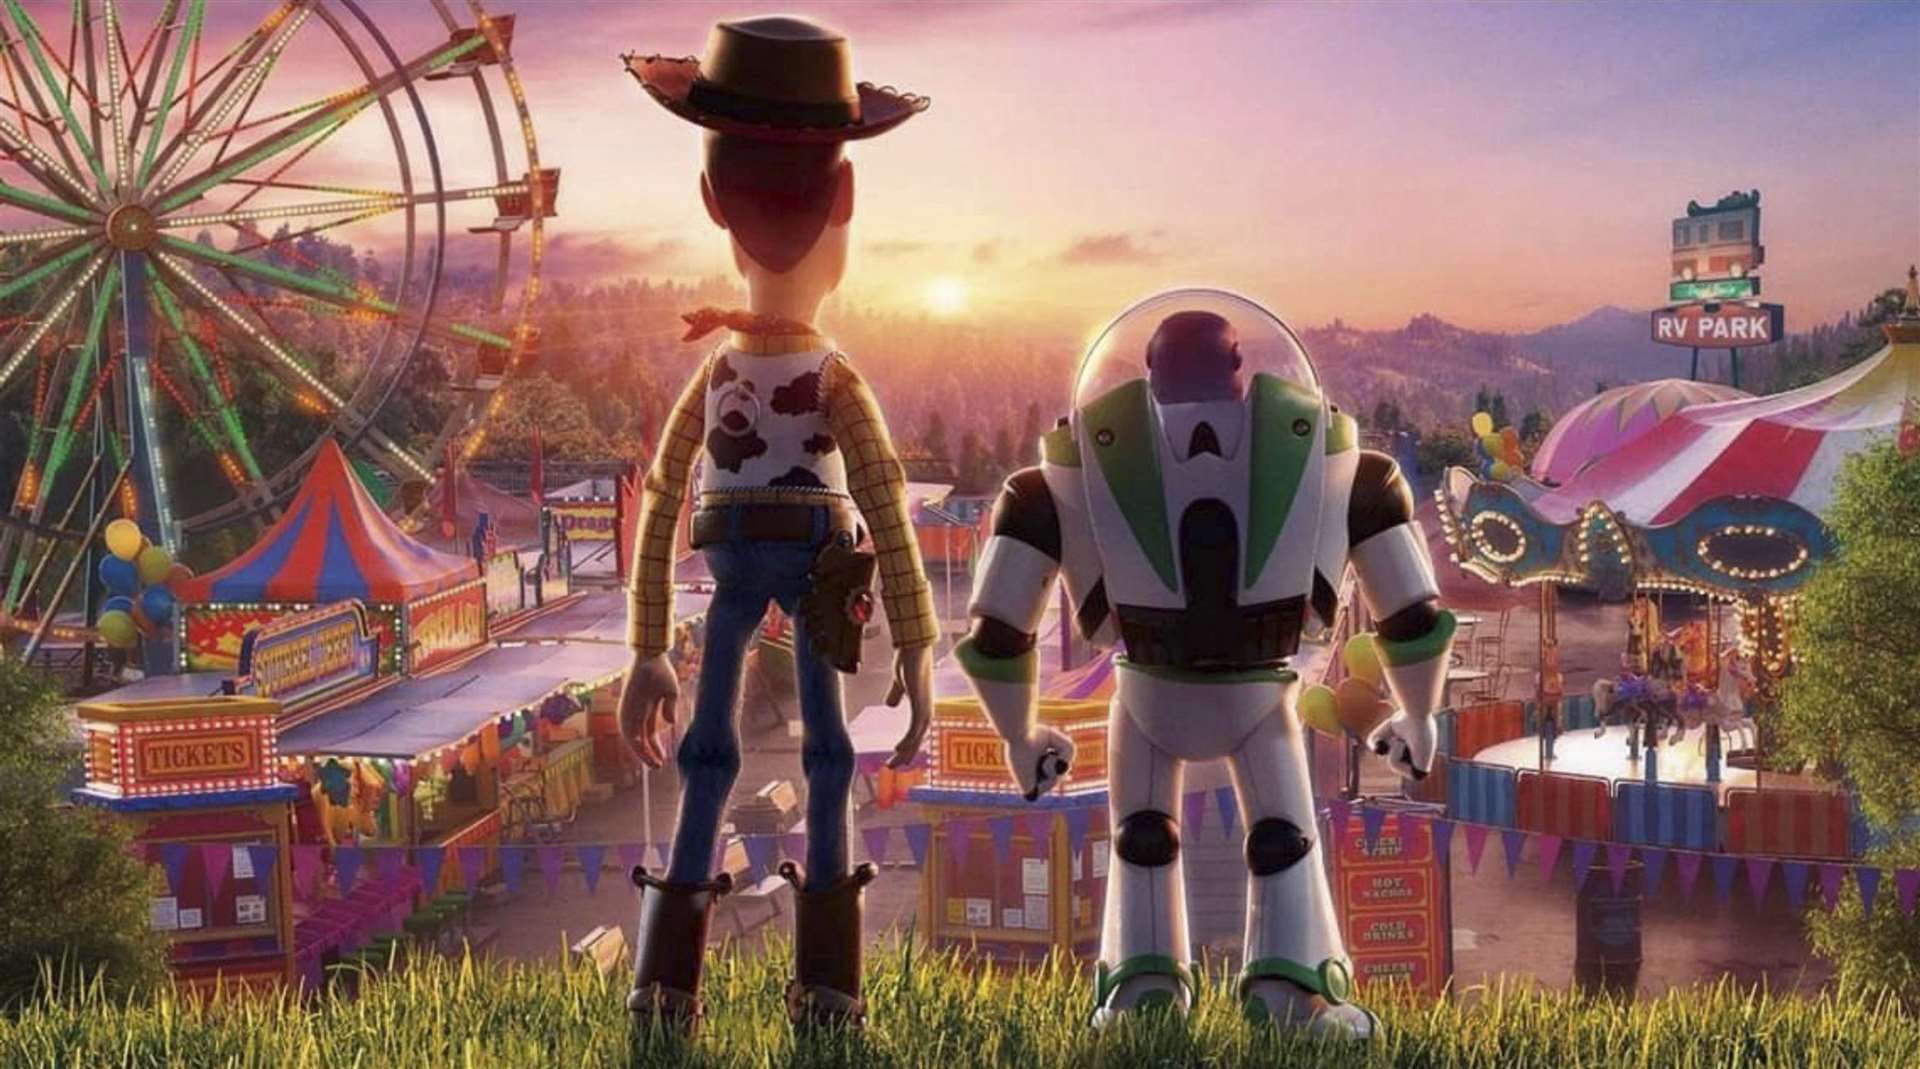 Toy Story 4 includes more than an hour of bonus features